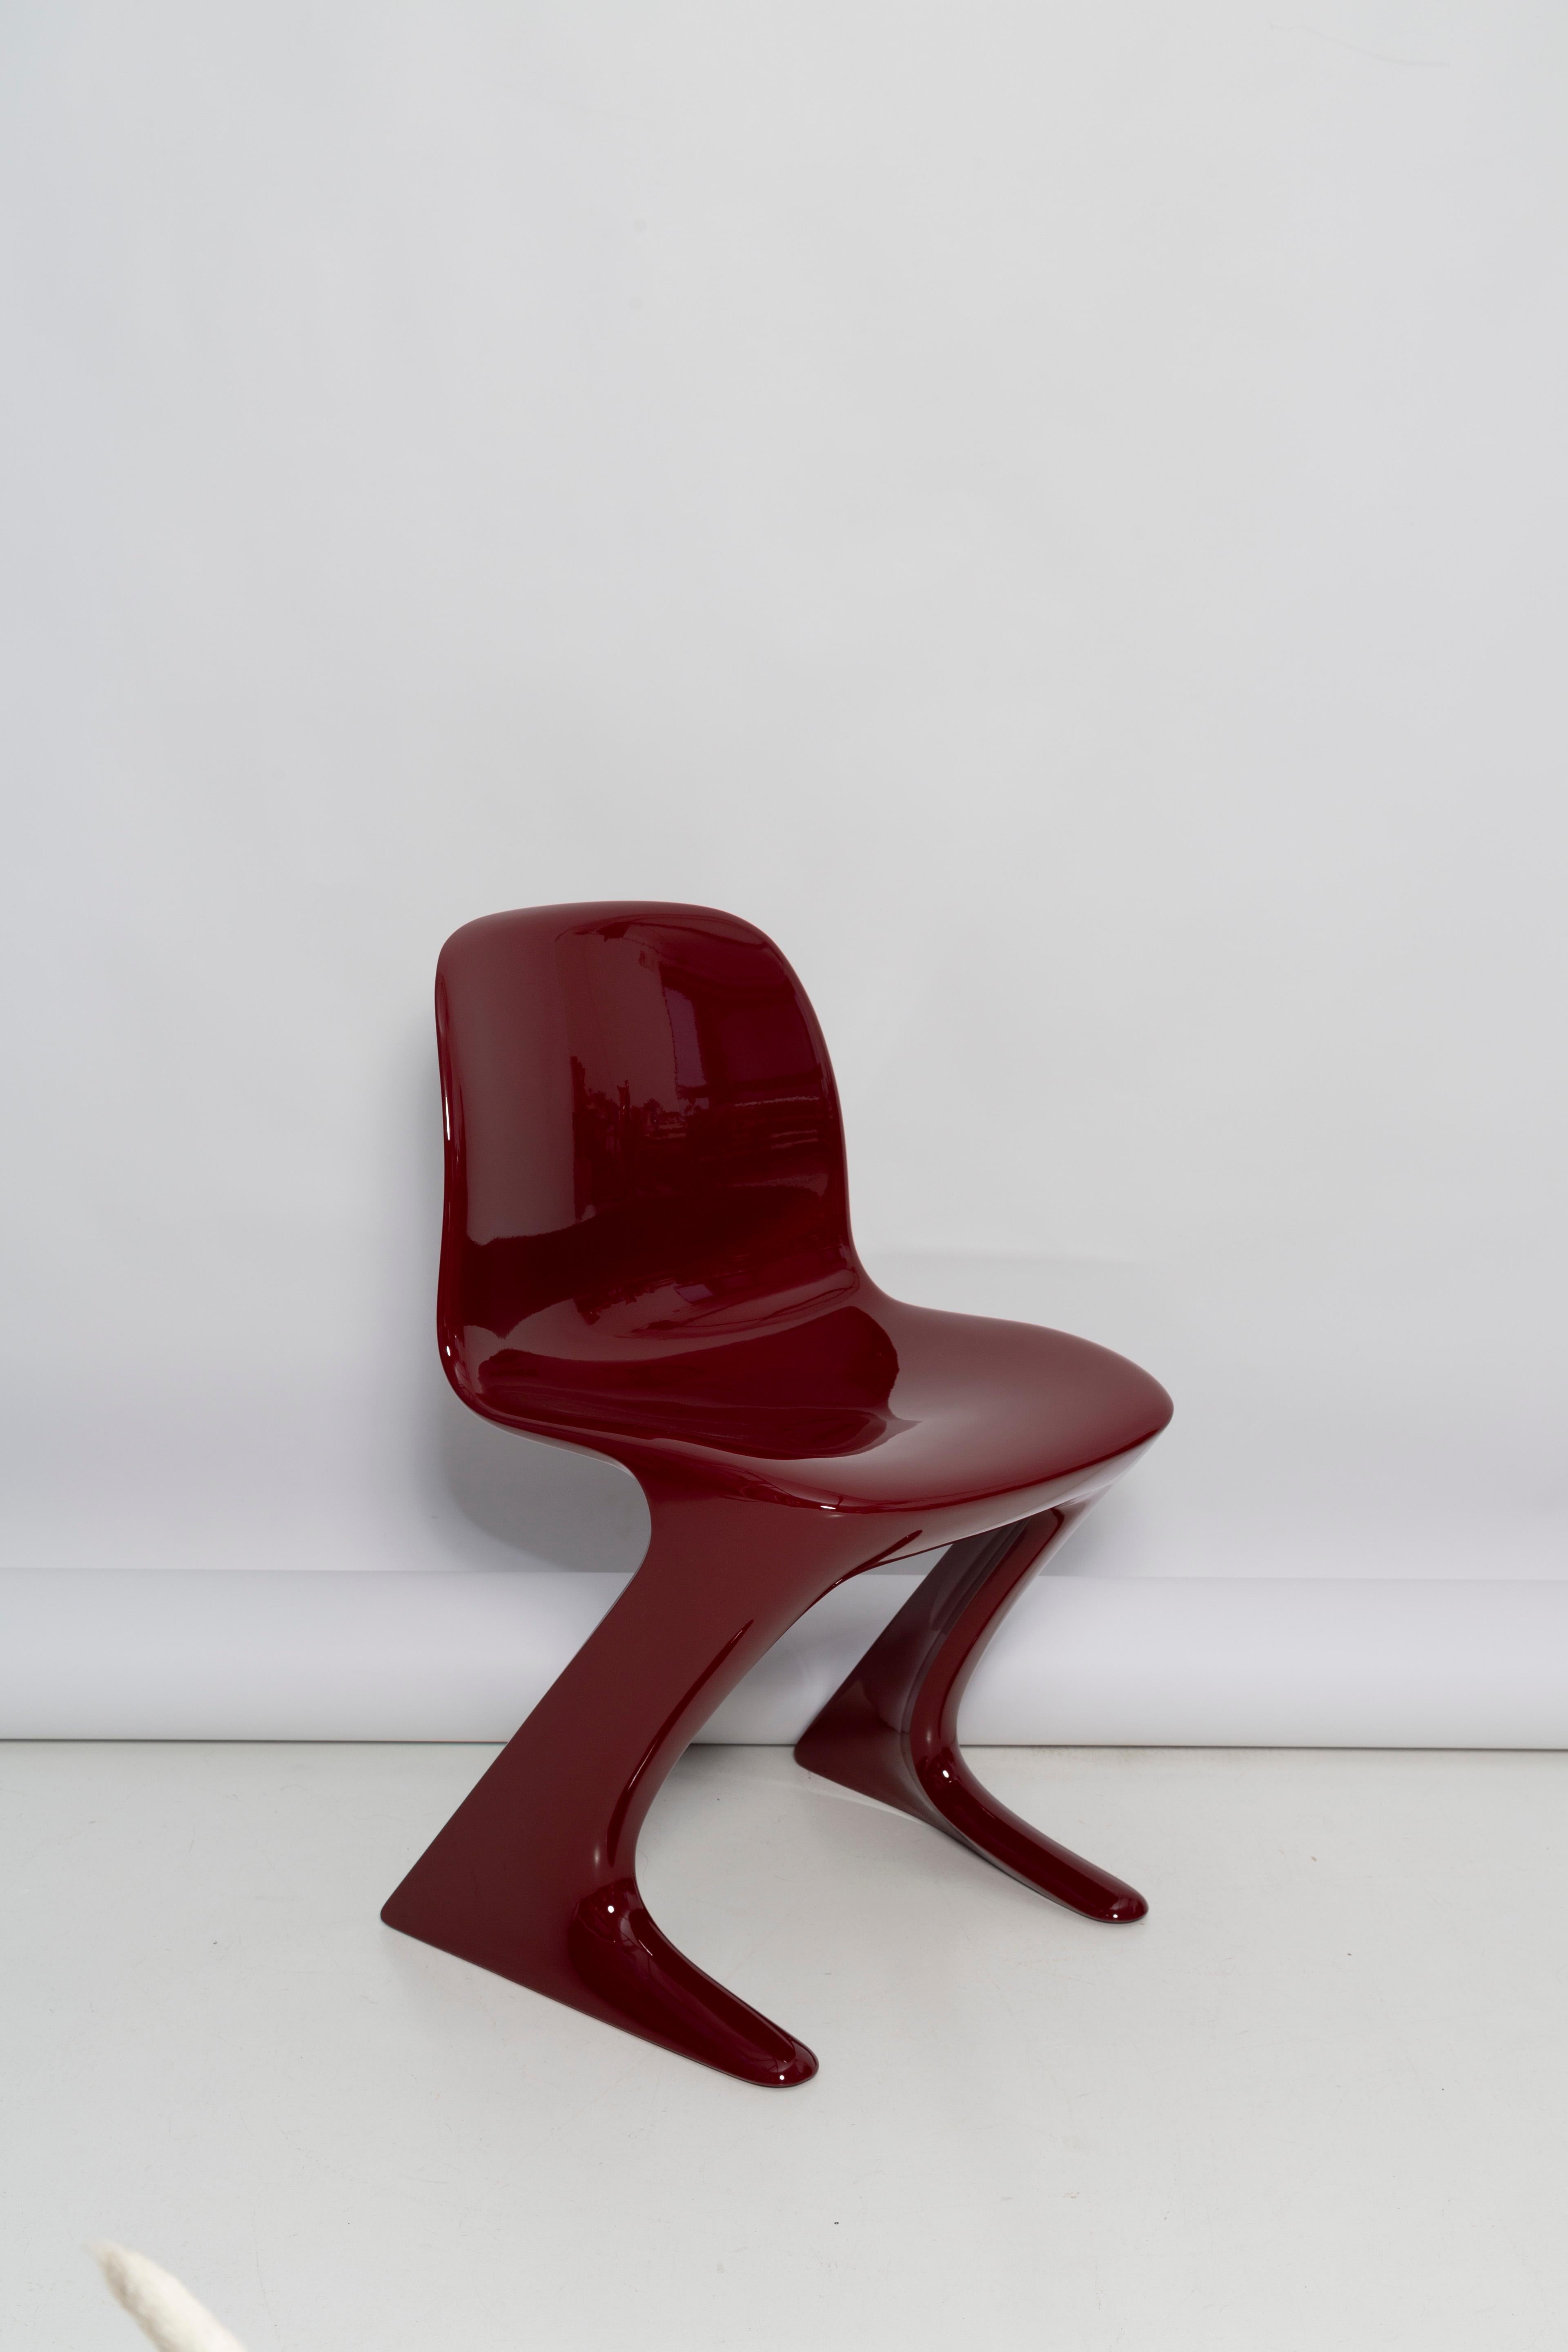 Set of Six Red Wine Kangaroo Chairs Designed by Ernst Moeckl, Germany, 1968 For Sale 3